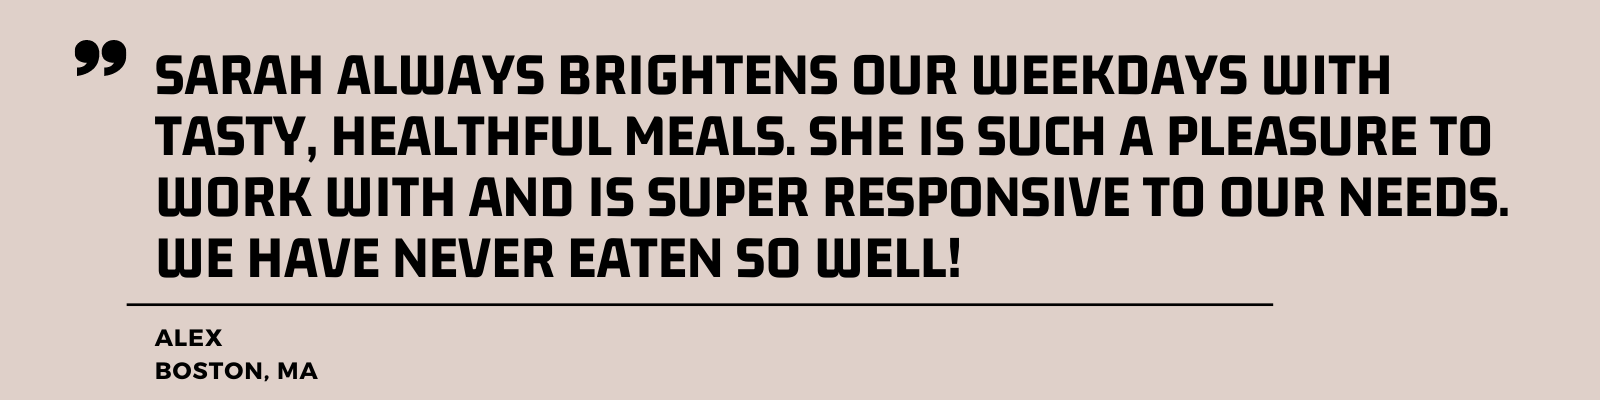 "Sarah always brightens our weekdays with tasty, healthful meals. She is such a pleasure to work with and is super responsive to our needs. We have never eaten so well!" - Alex, Boston, MA